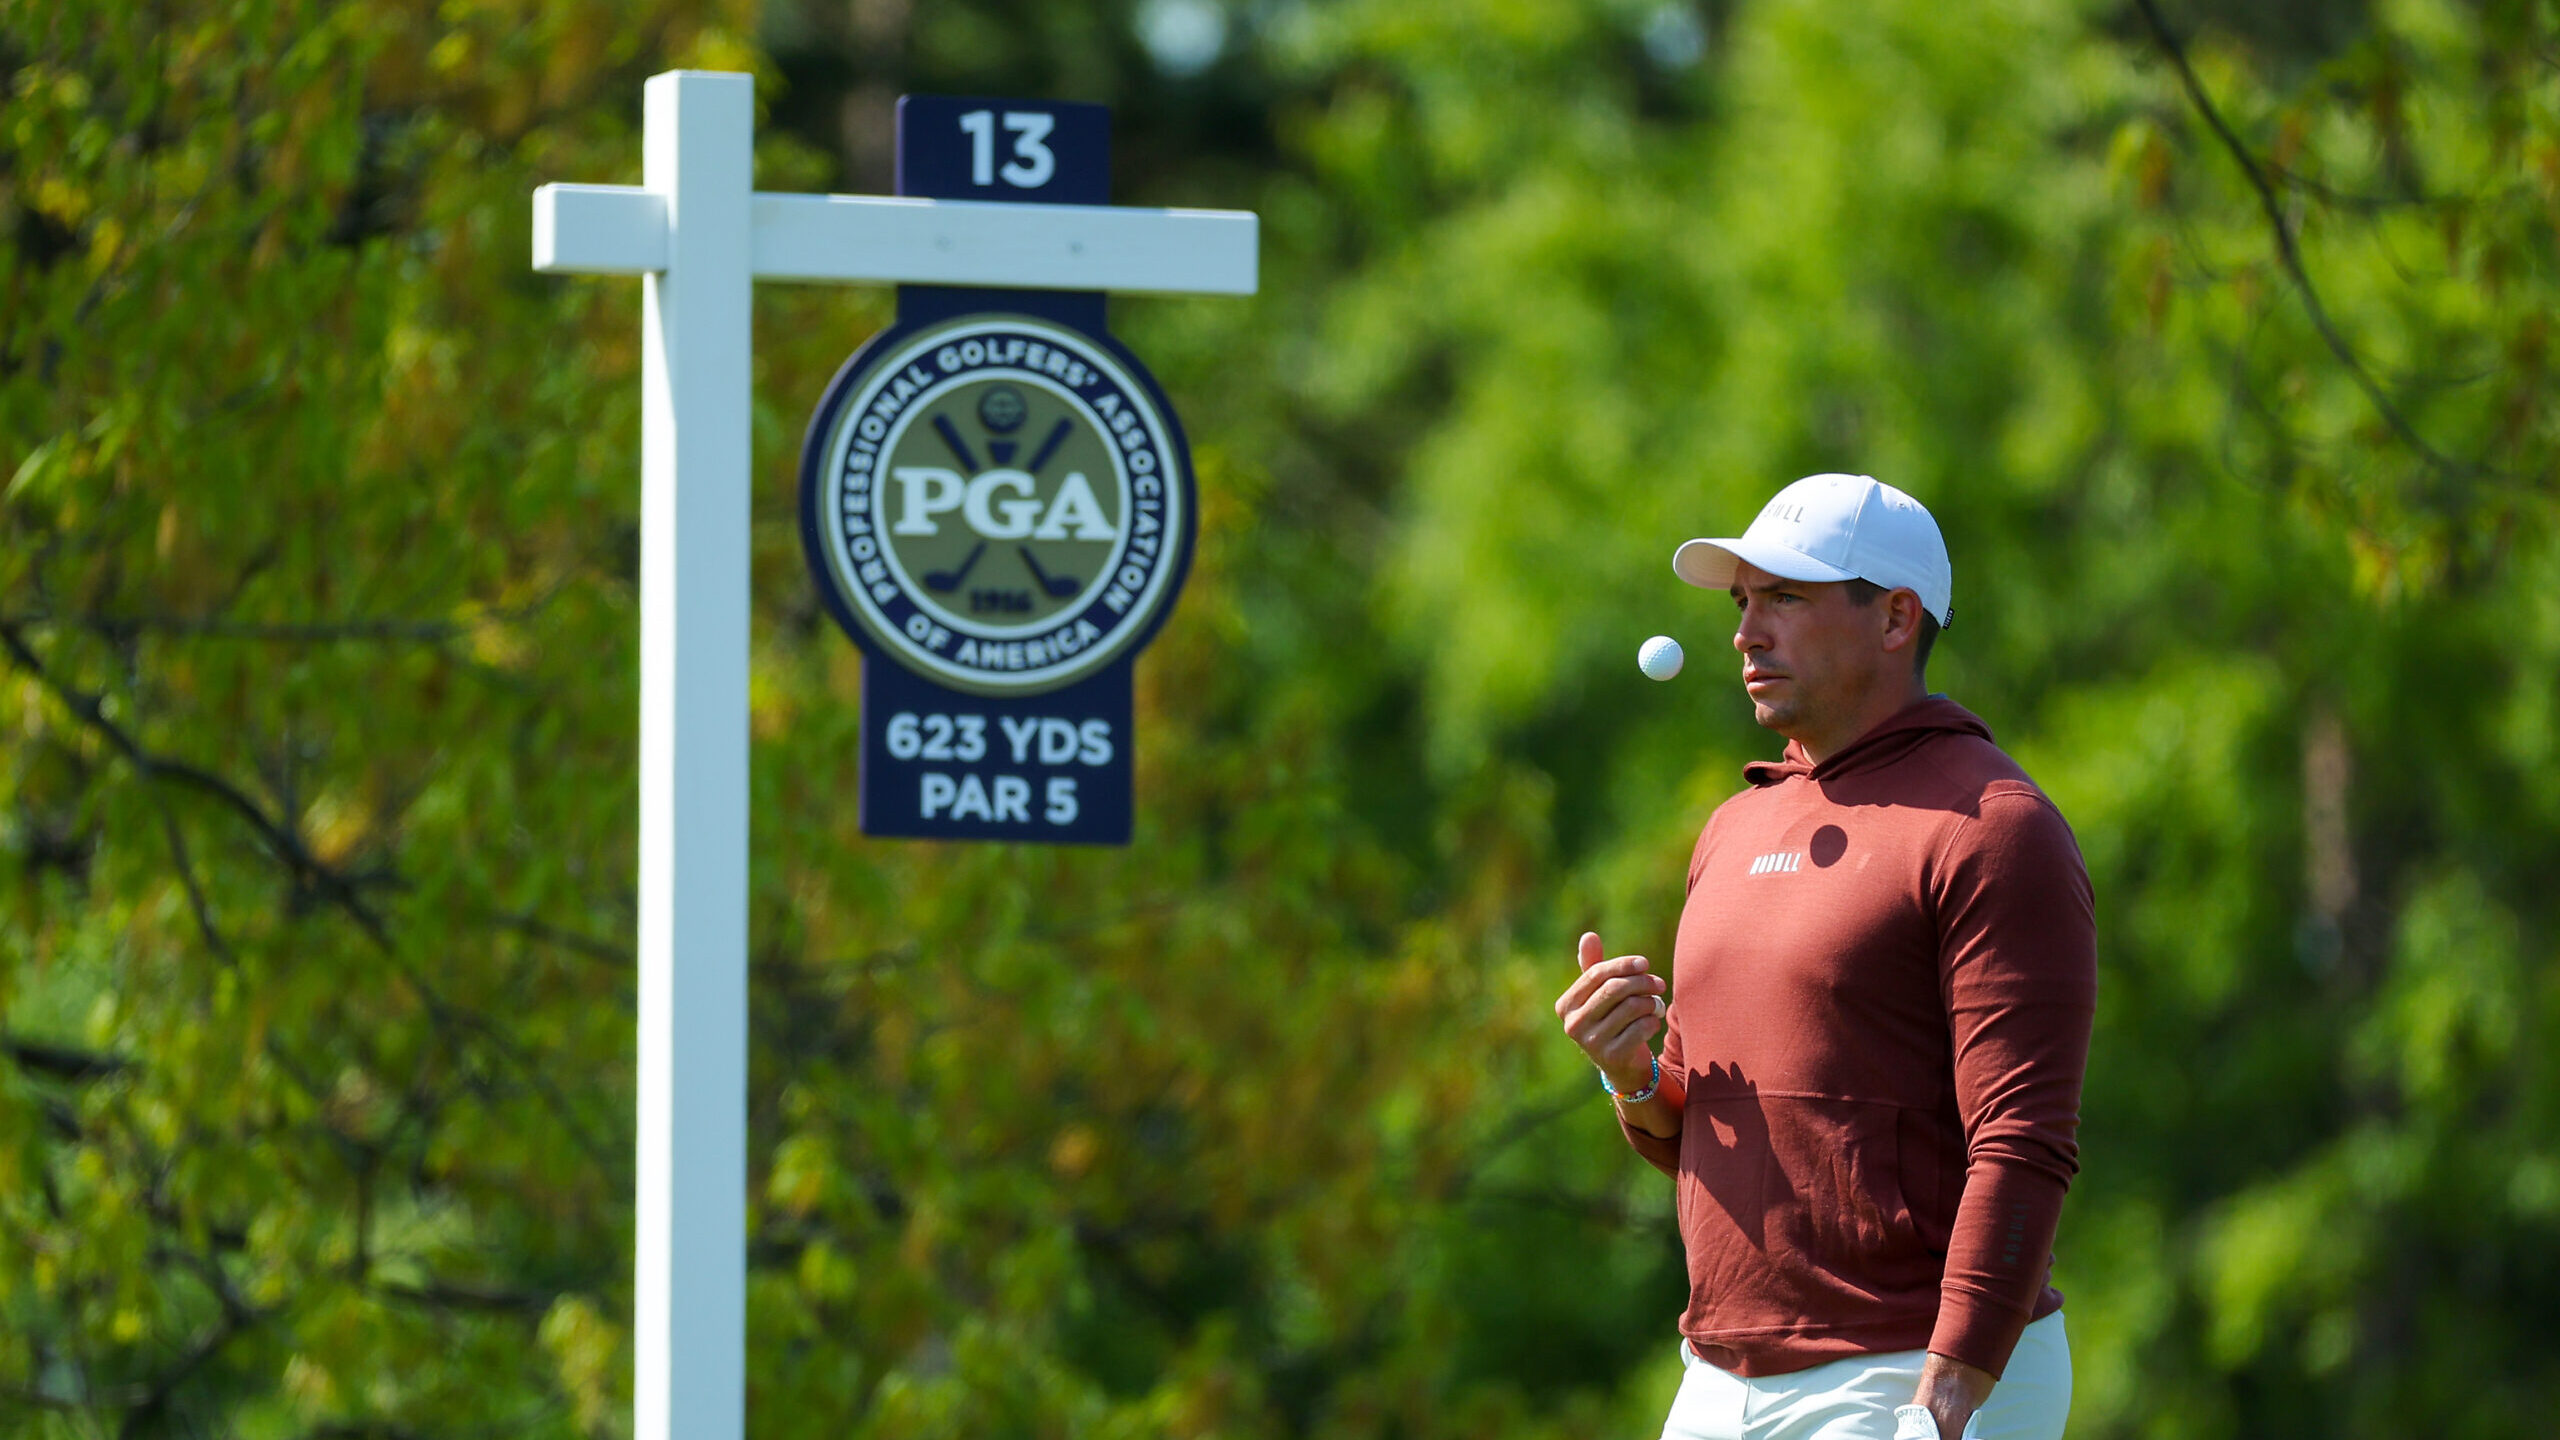 PGA Championship Promises A Strong Course For The Strongest Field